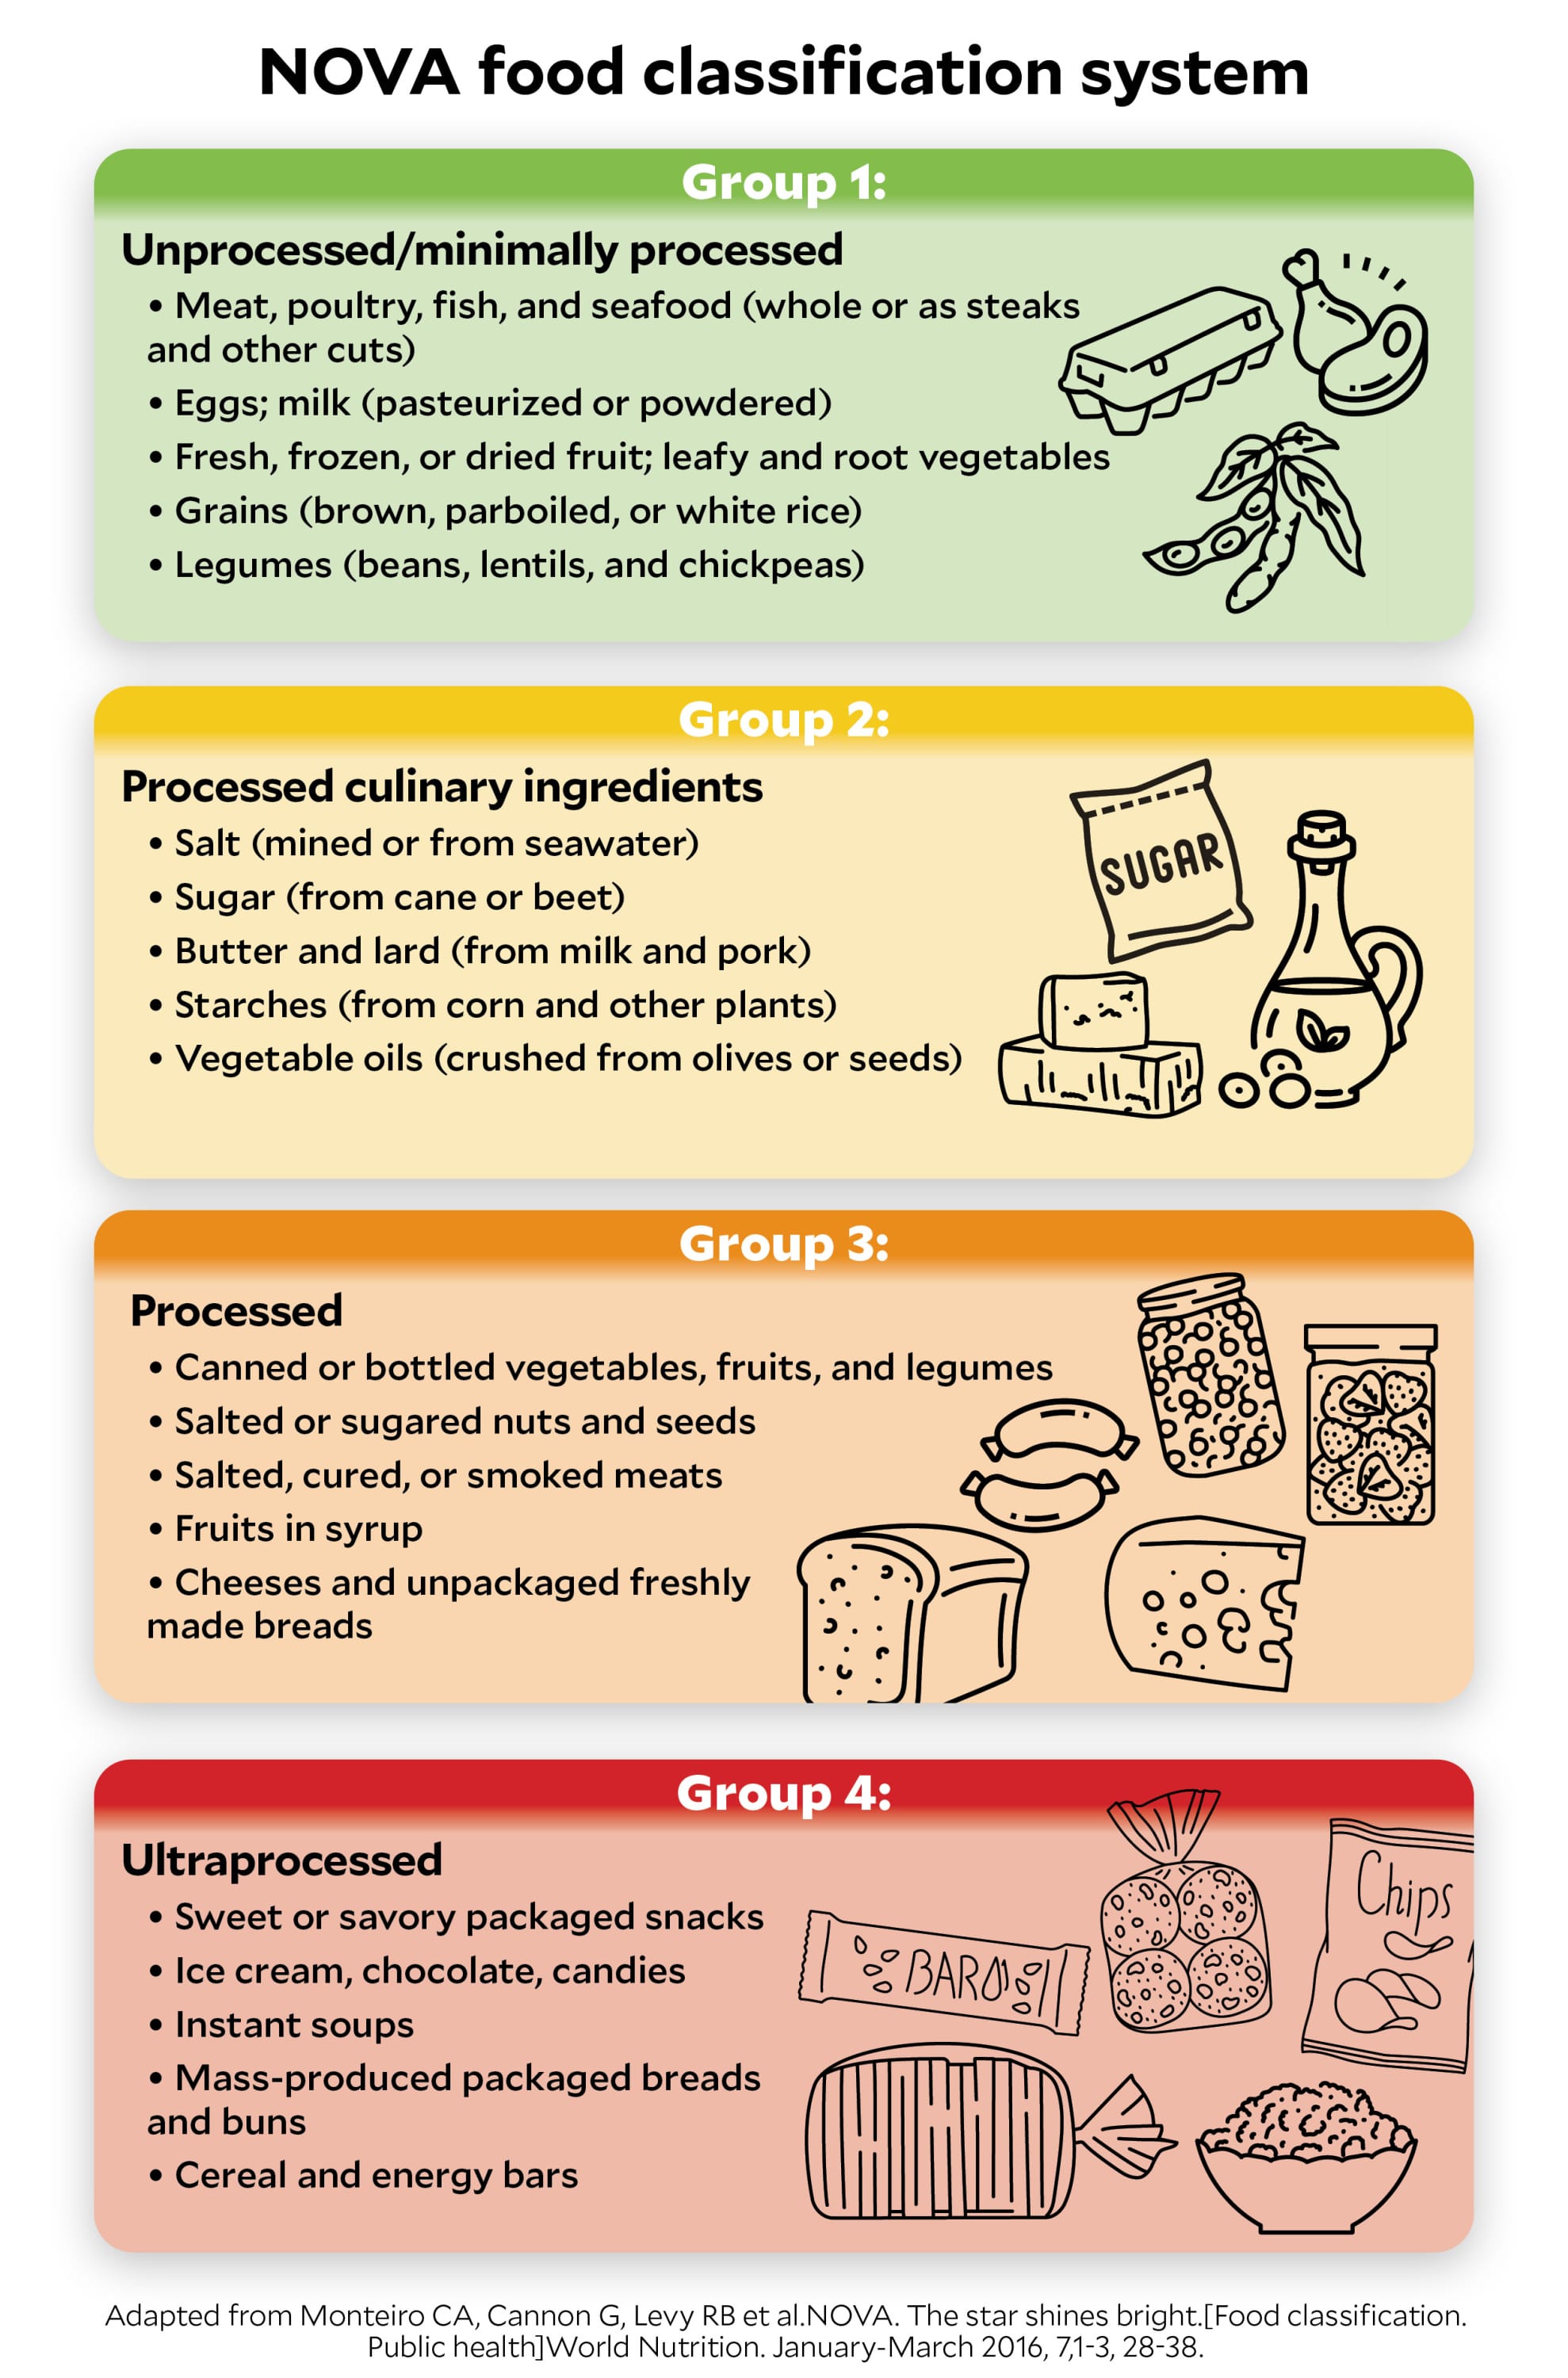 illustration of NOVA classification system for ultraprocessed foods